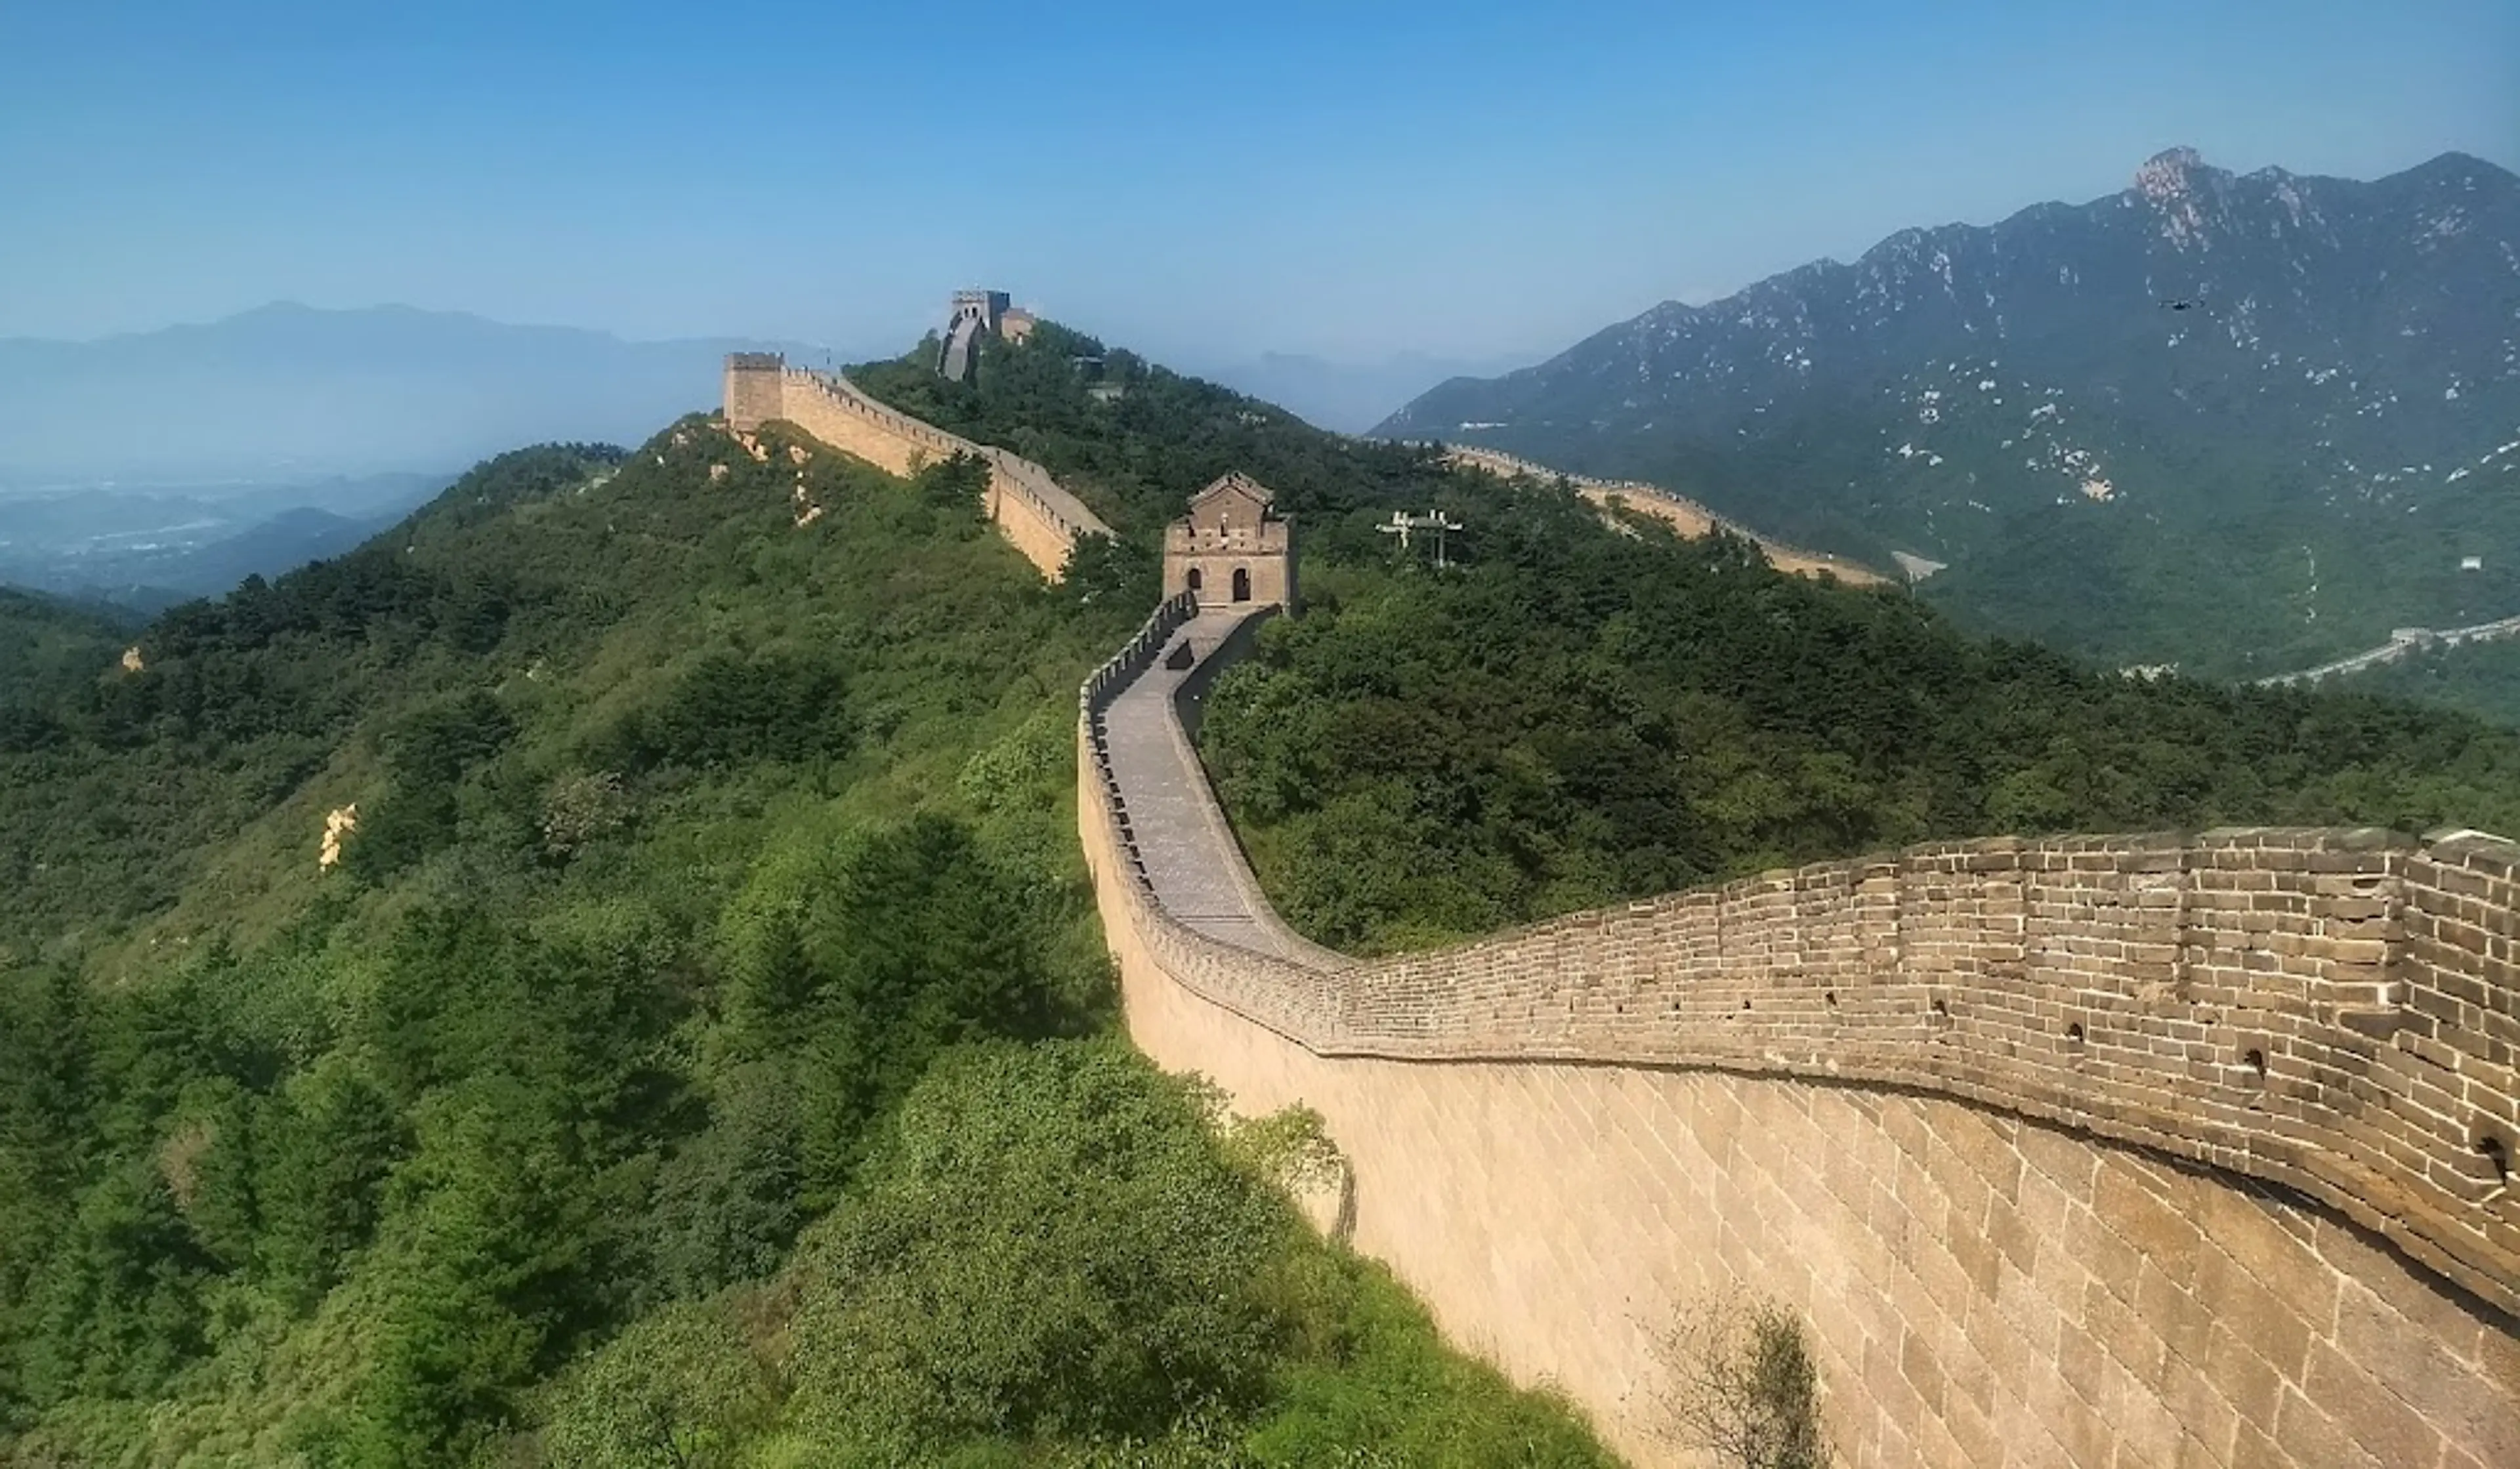 The Great Wall of China - Badaling Section